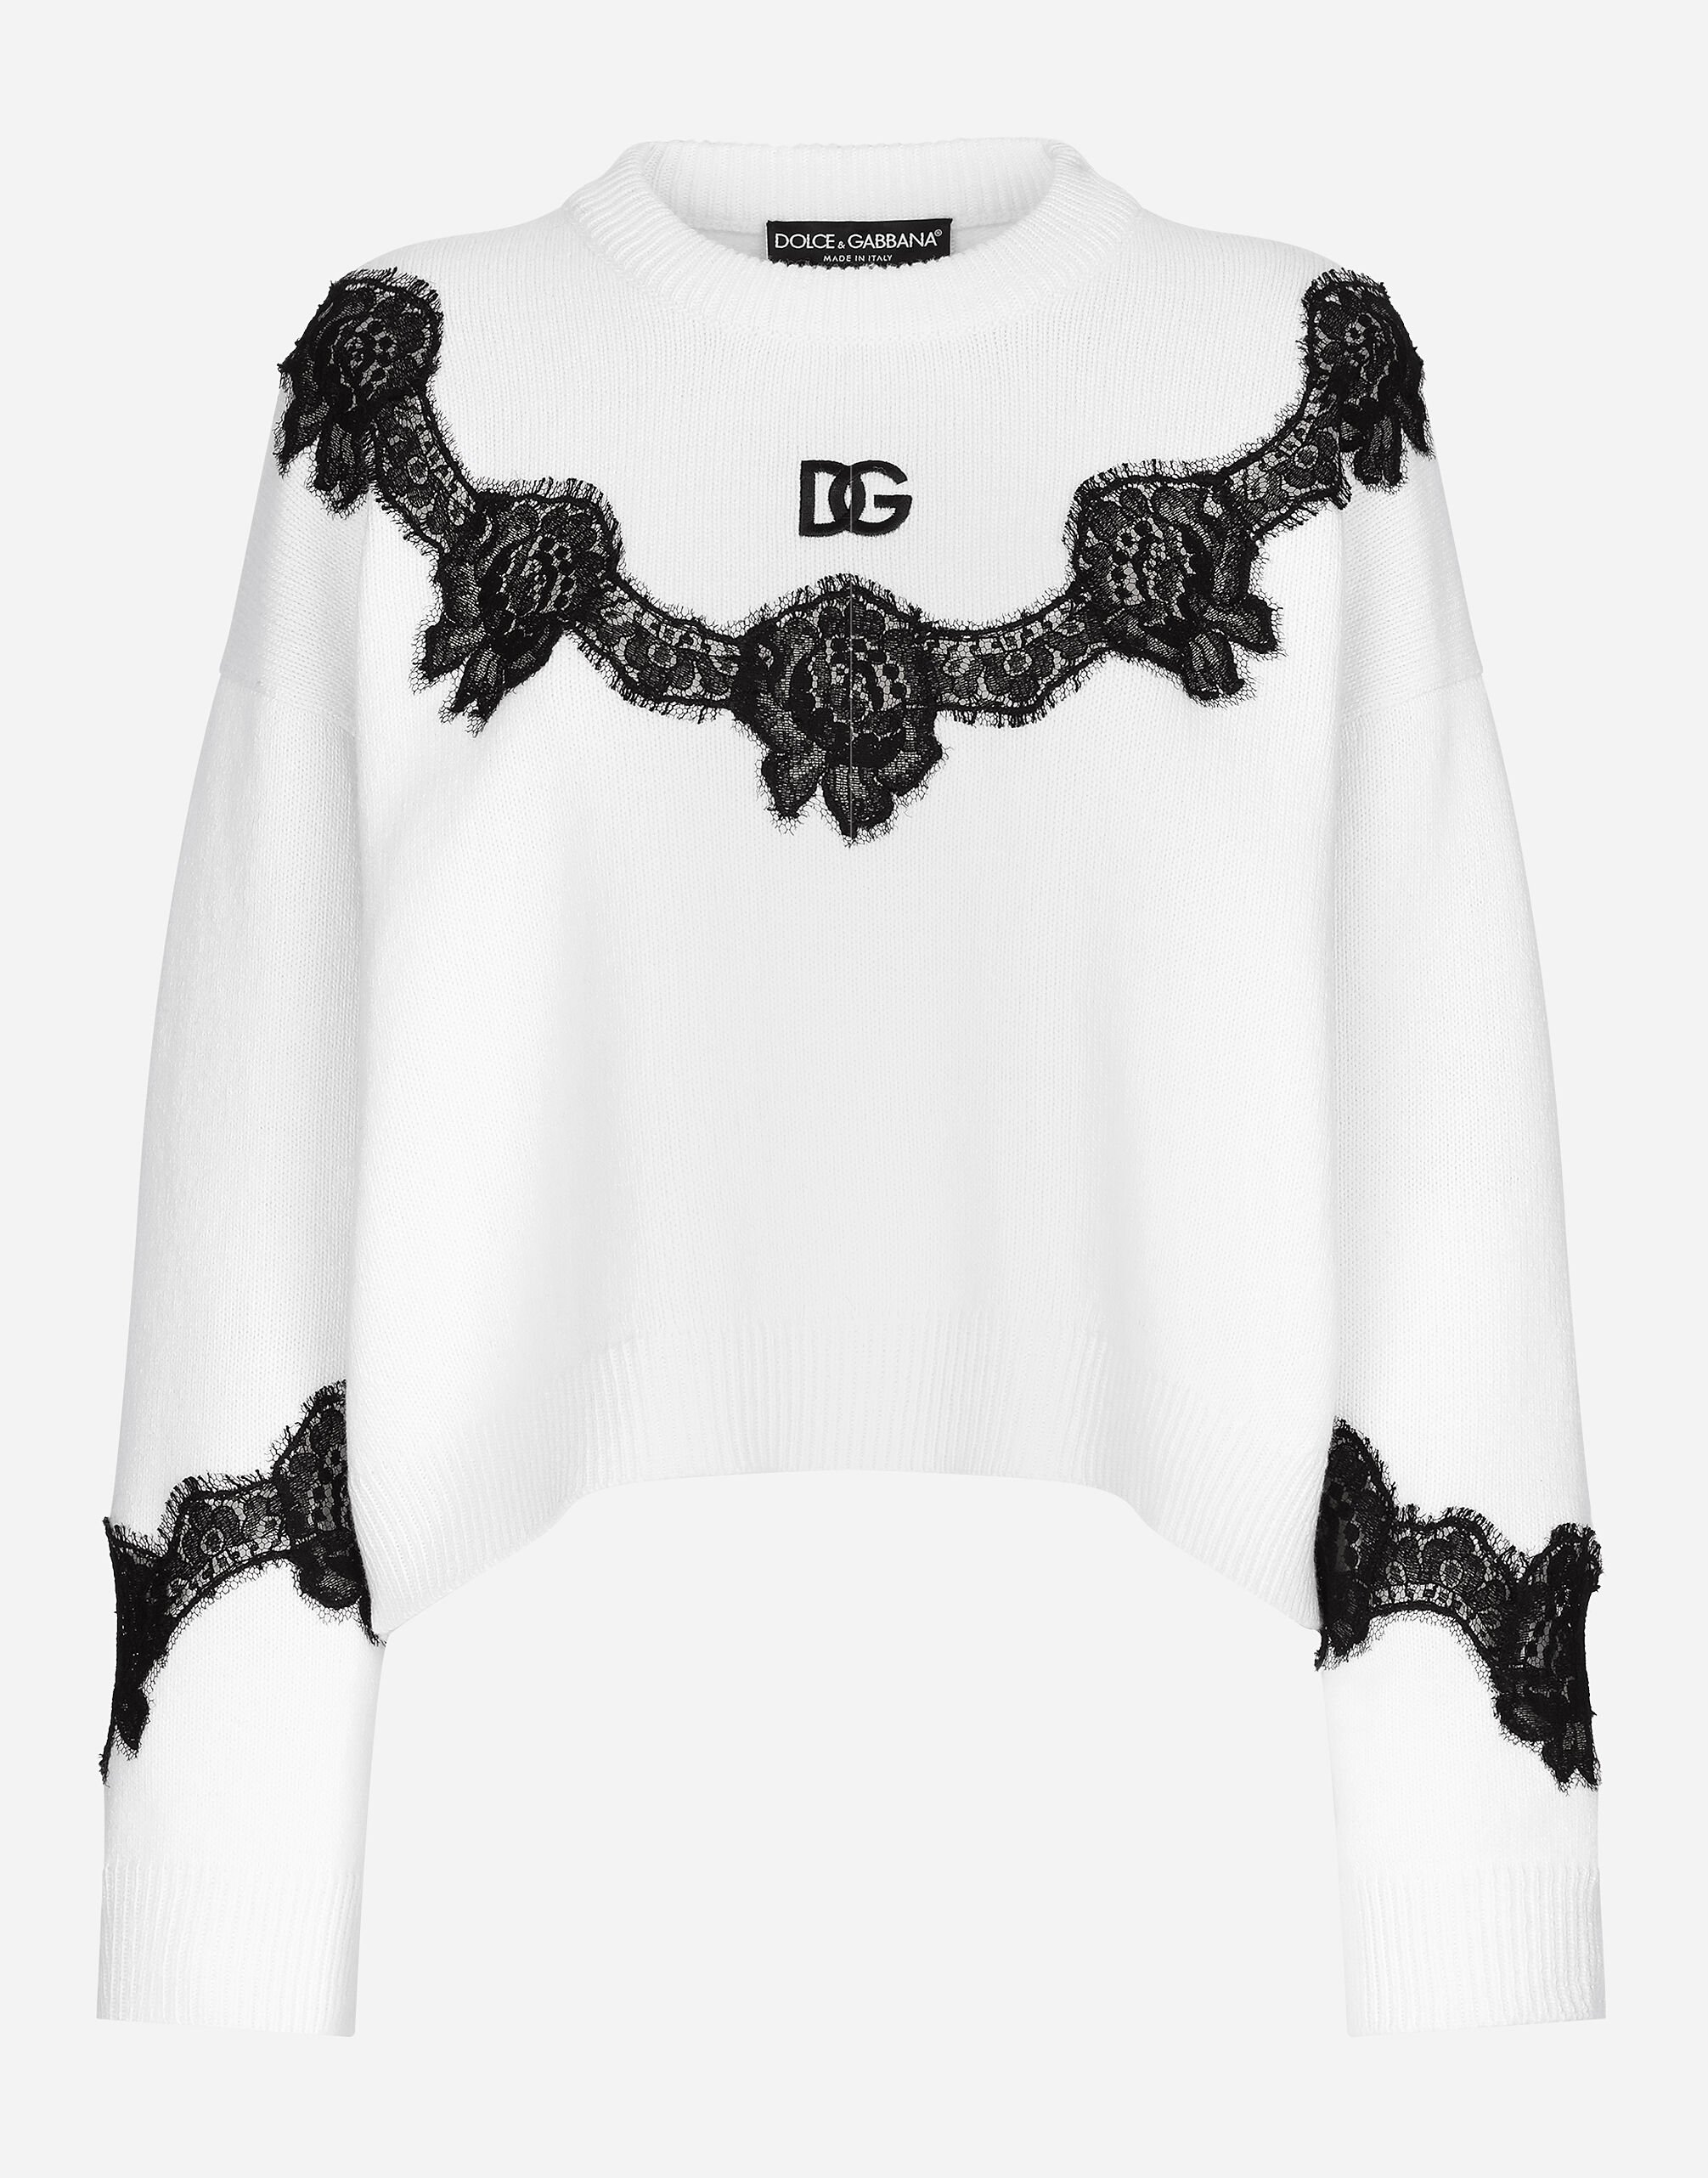 Dolce & Gabbana Wool sweater with DG logo and lace inserts Pink FXV07ZJBSHX